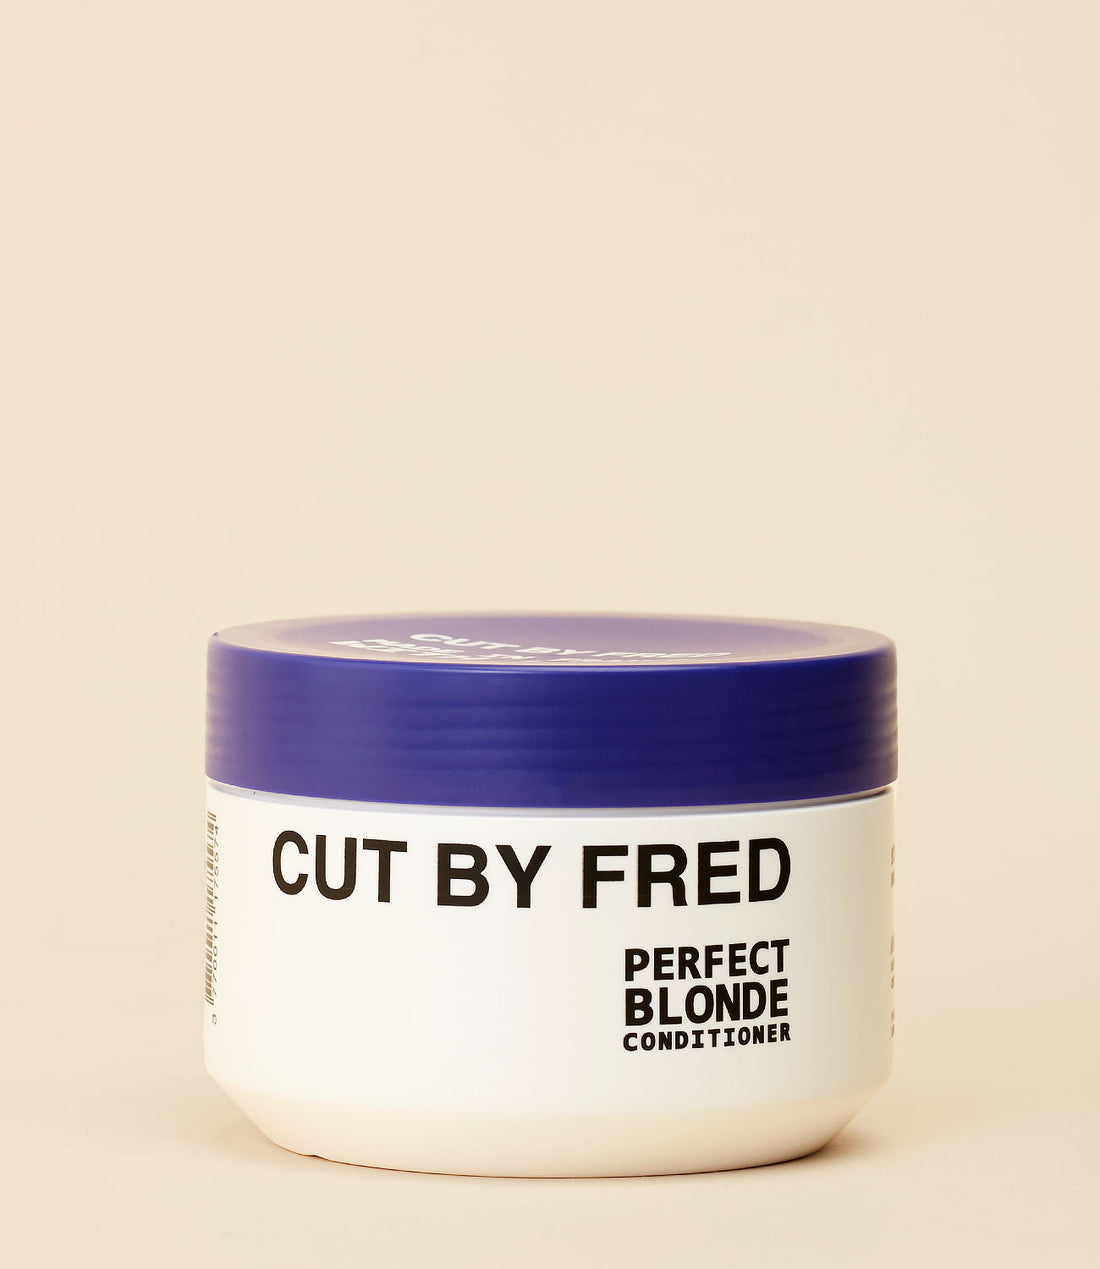 Après-shampoing Perfect Blonde Conditioner par Curt by Fred 